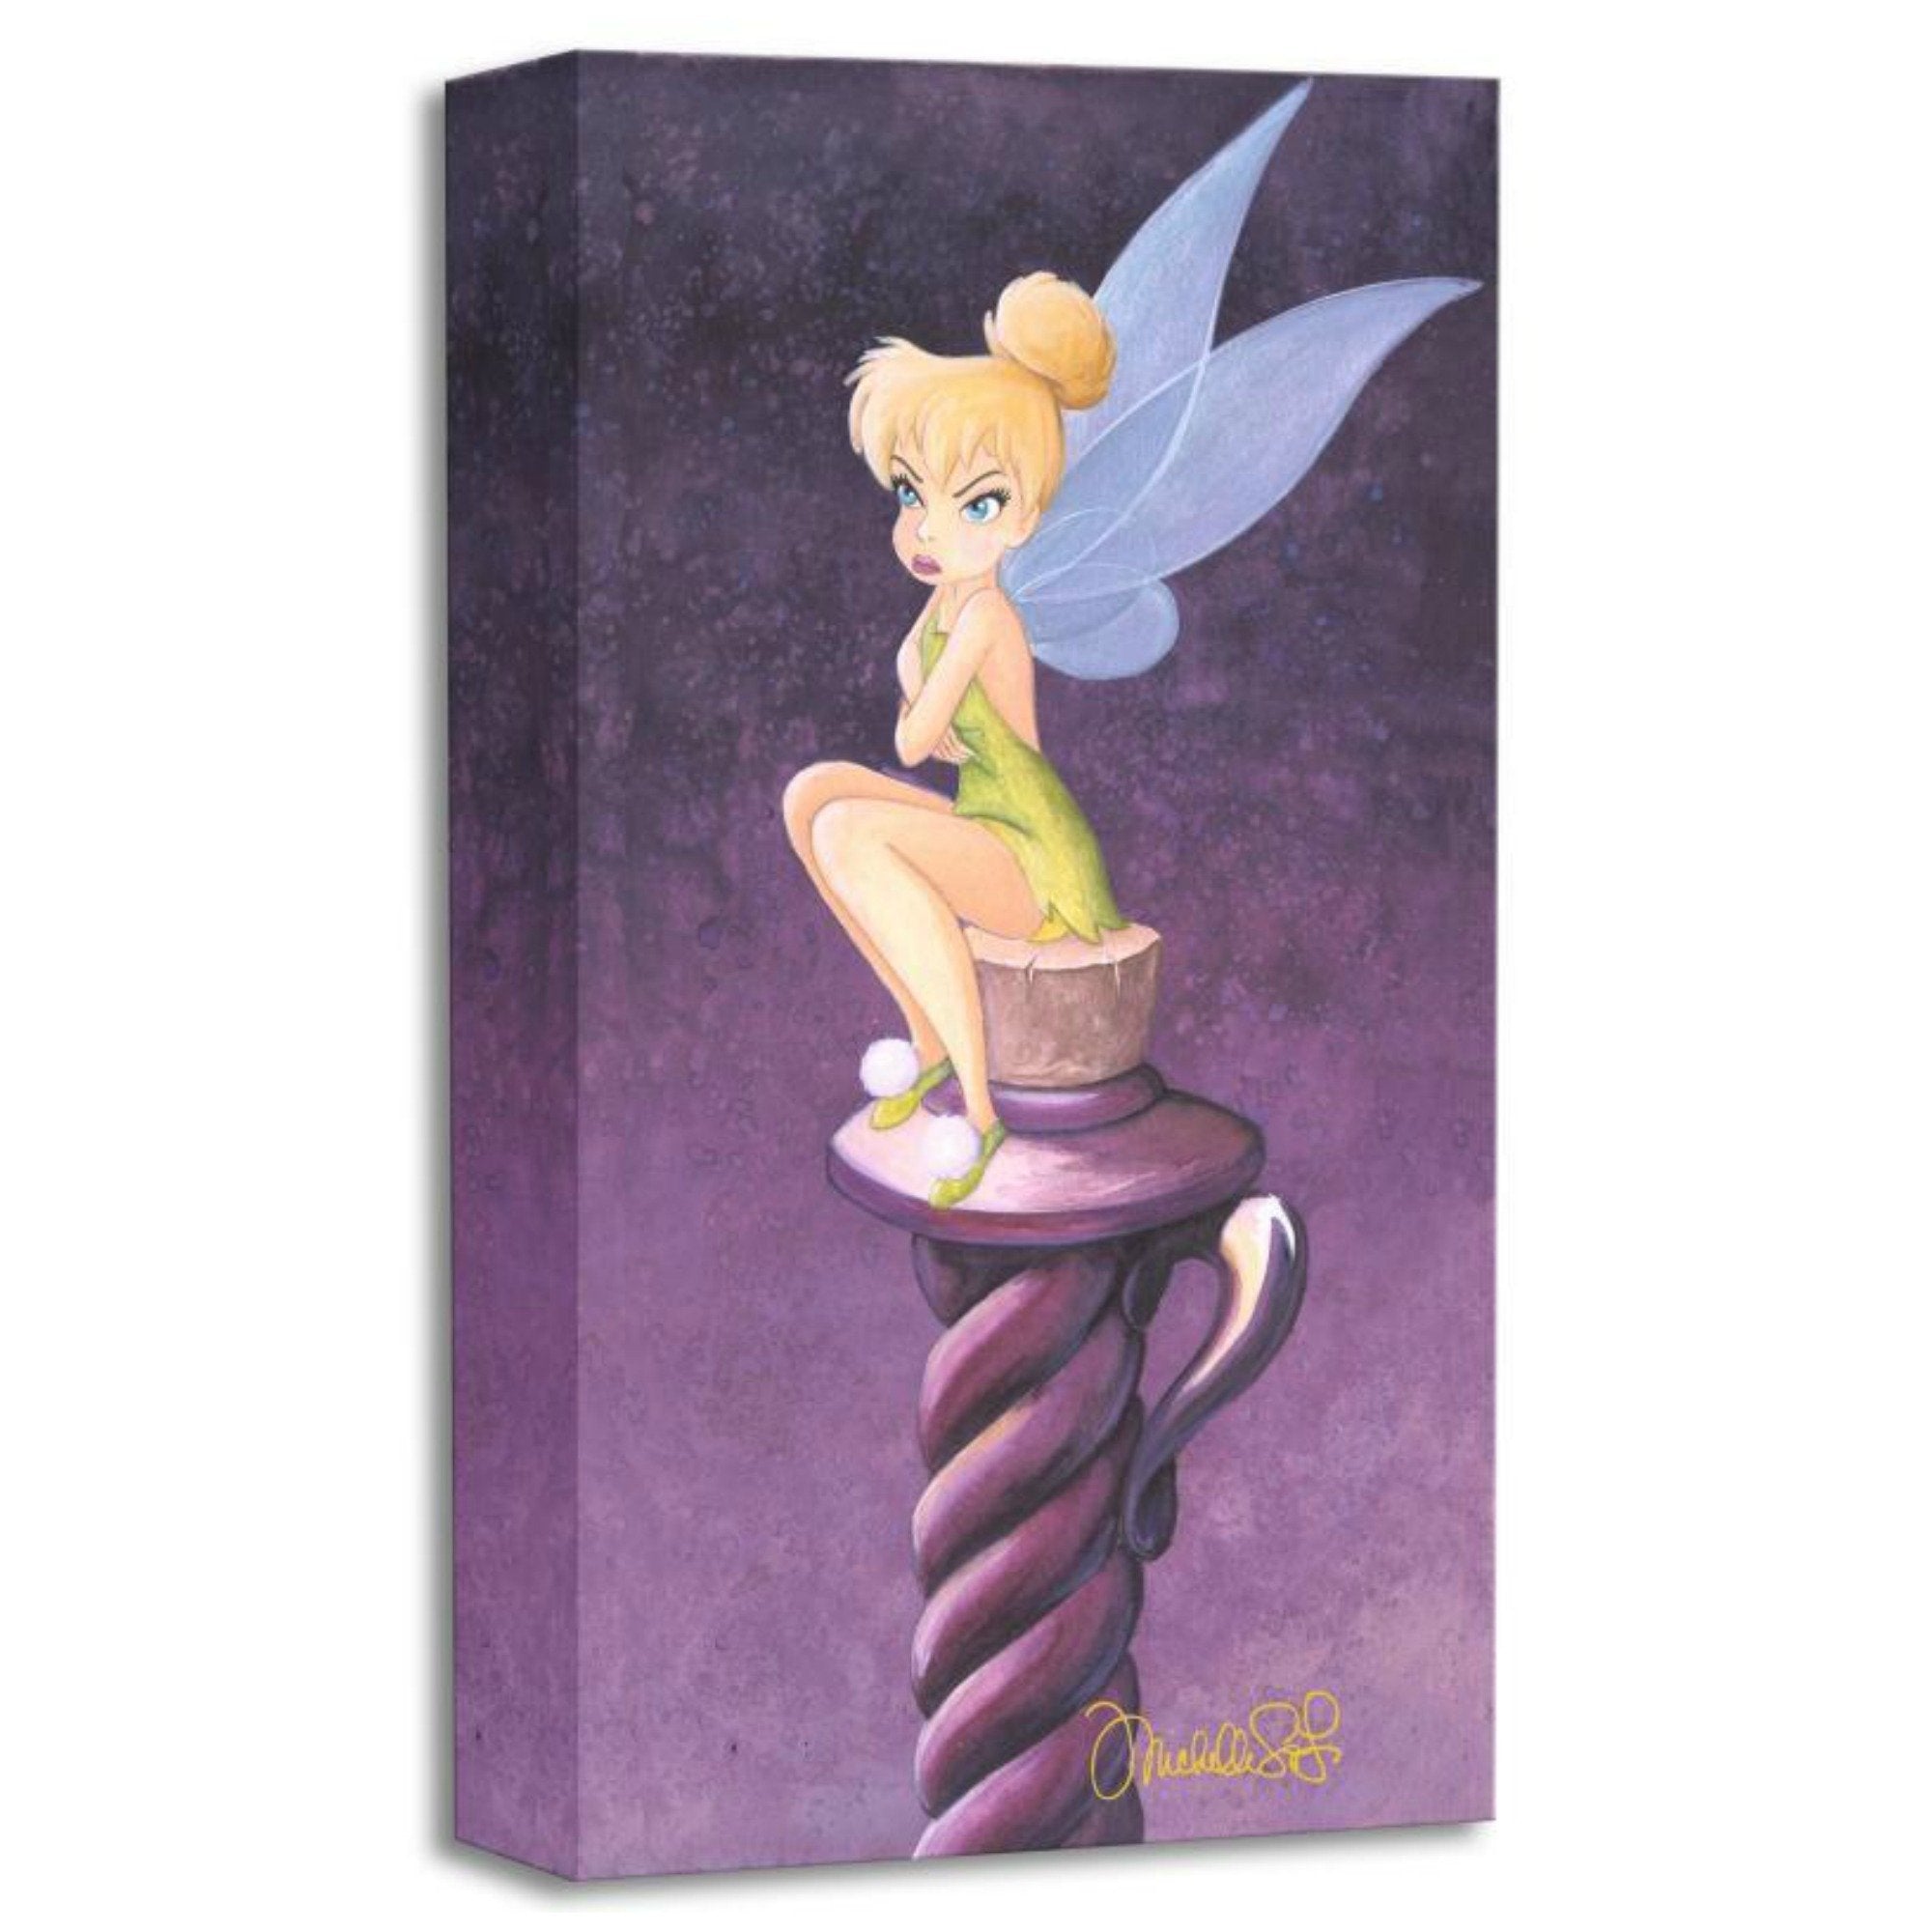 All Bottled Up by Michelle St. Laurent.  Tinker Bell is pouting as she sits on top of a cork bottle.